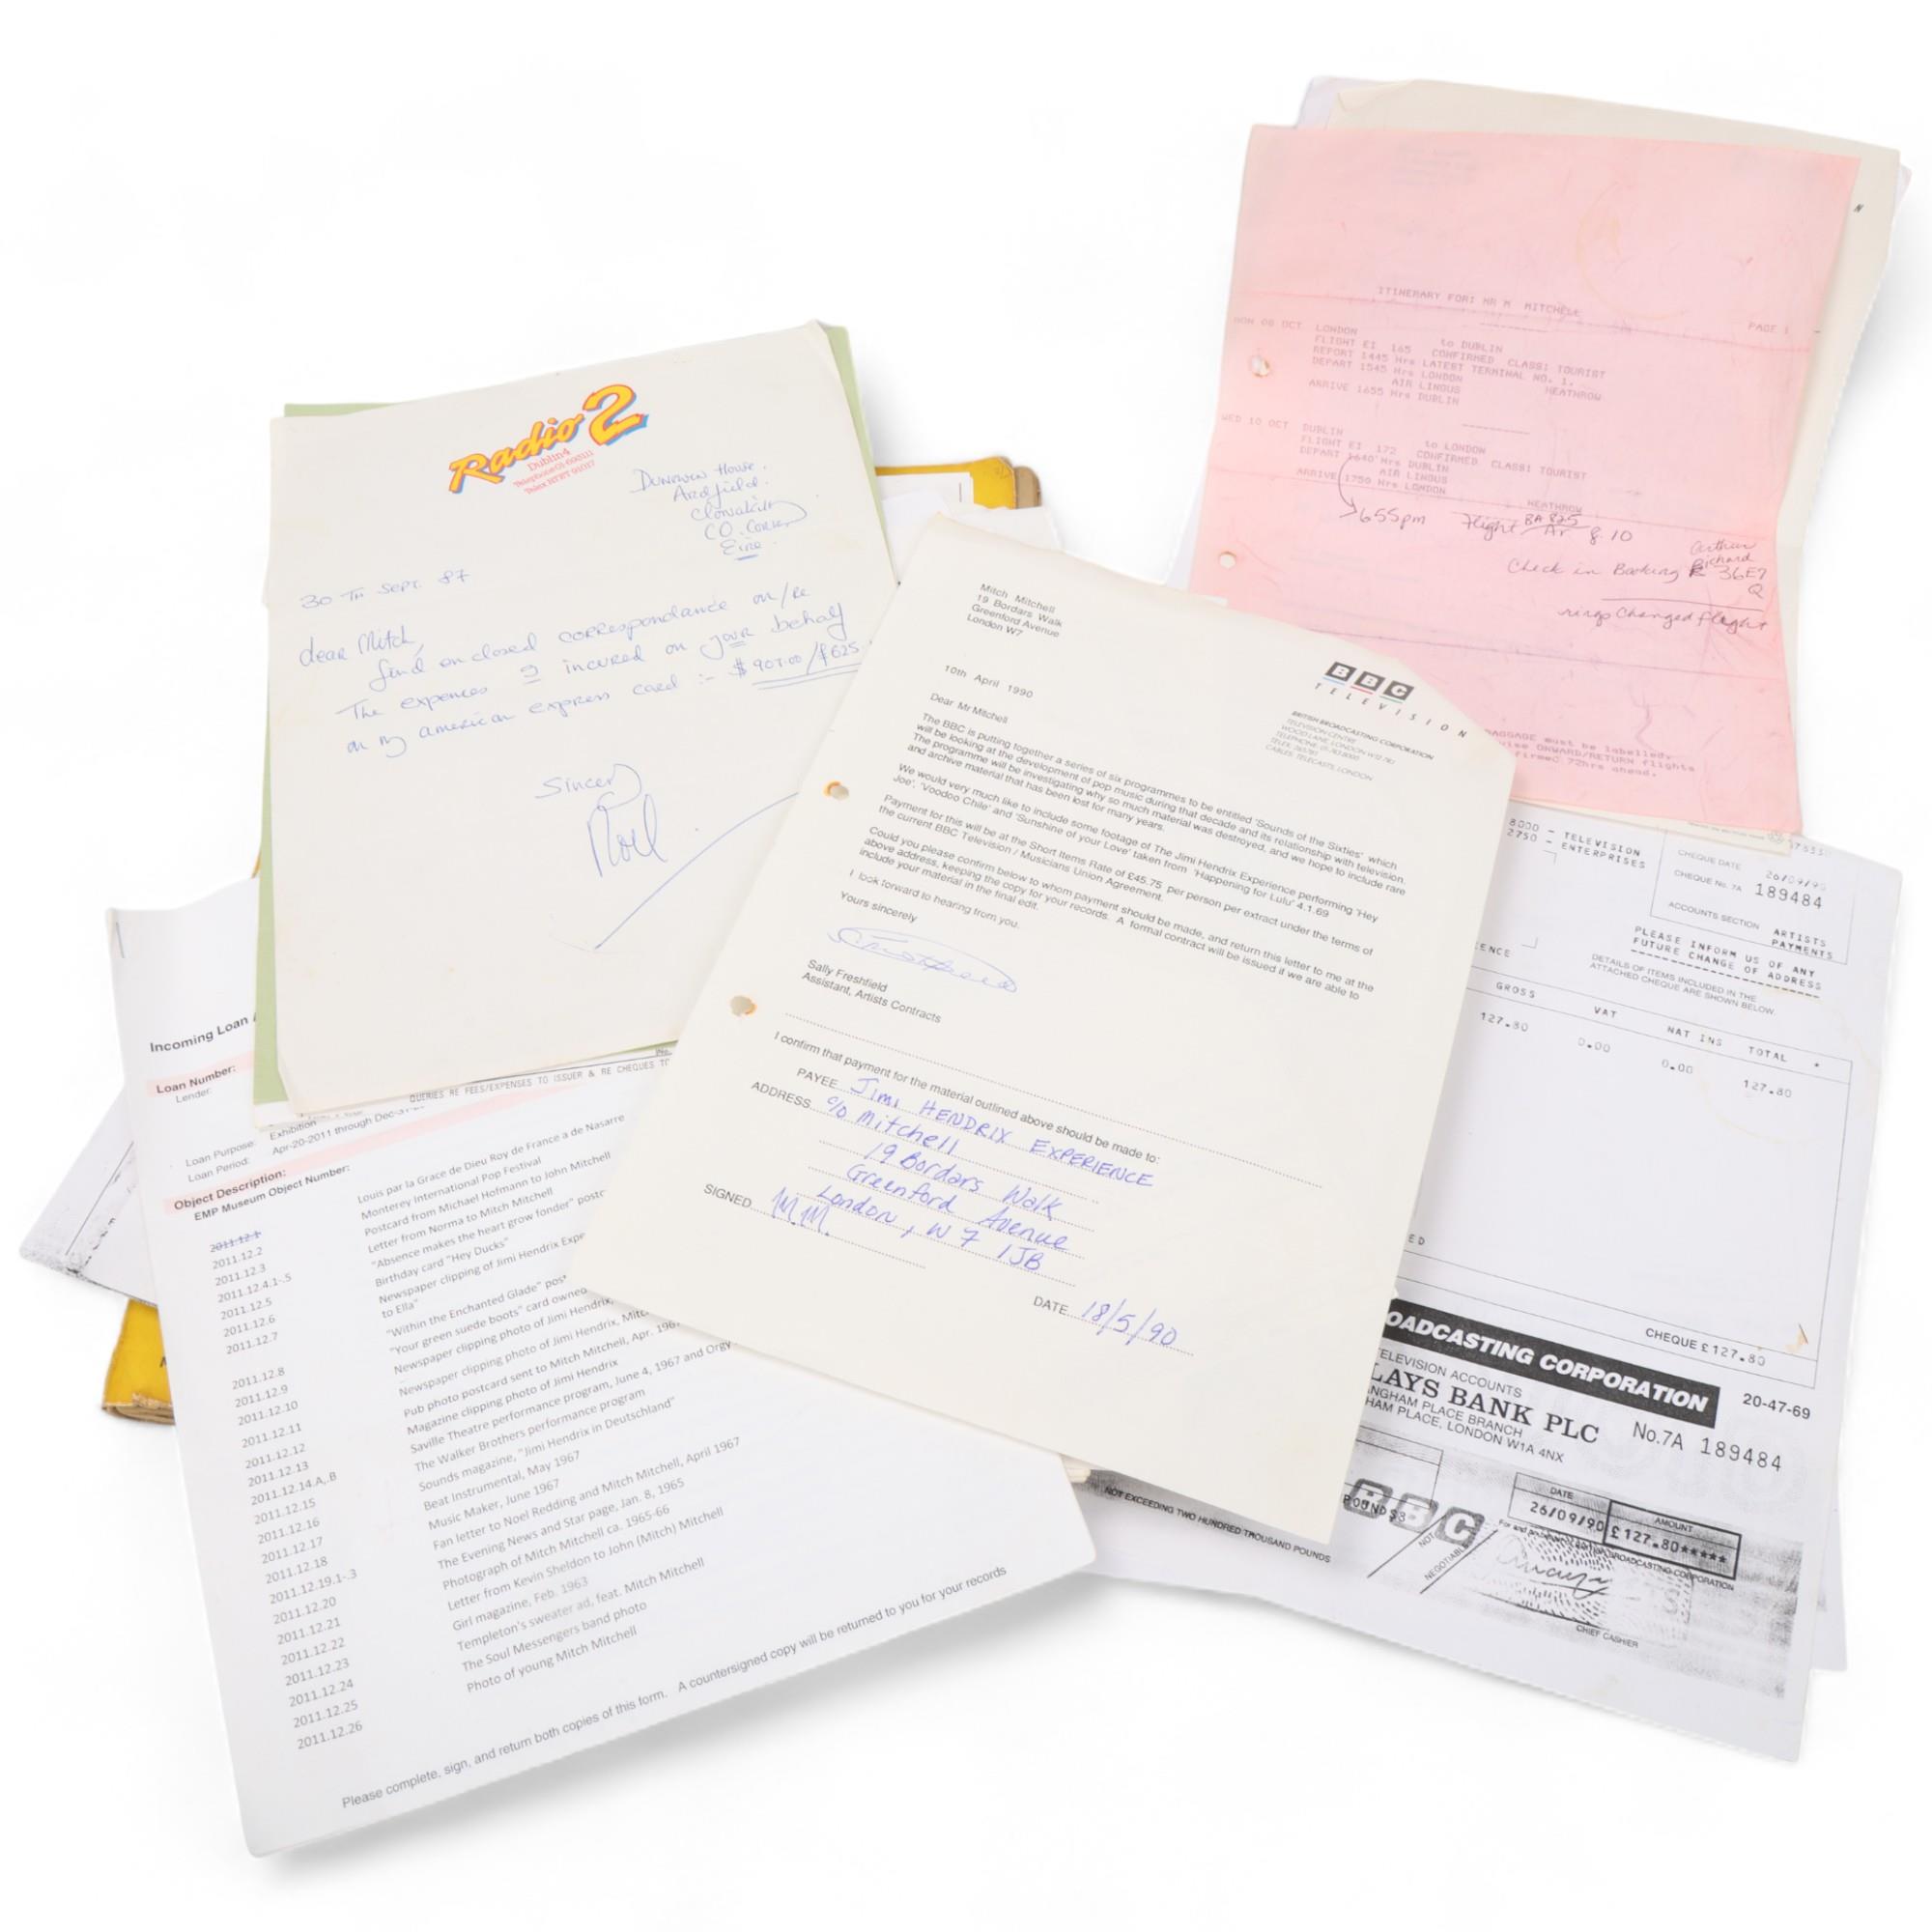 MITCH MITCHELL / JIMI HENDRIX. A Quantity of CONTRACTS, SCHEDULES, LETTERS Etc